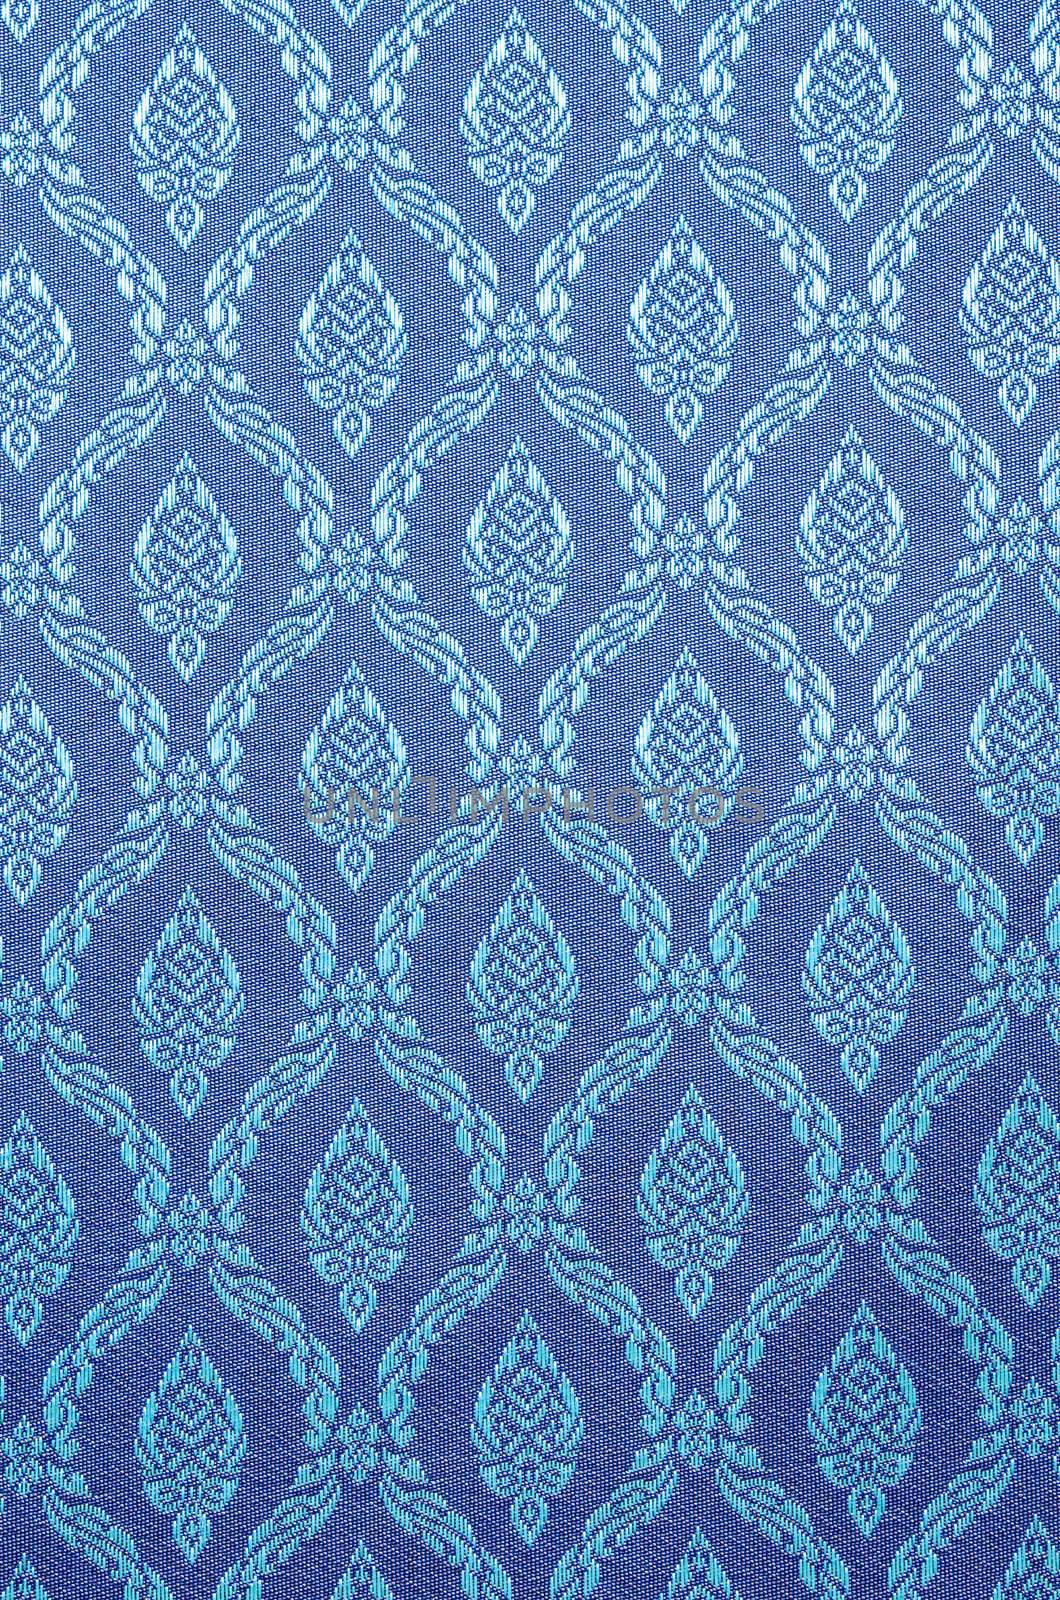 Thai art blue wall pattern for background.